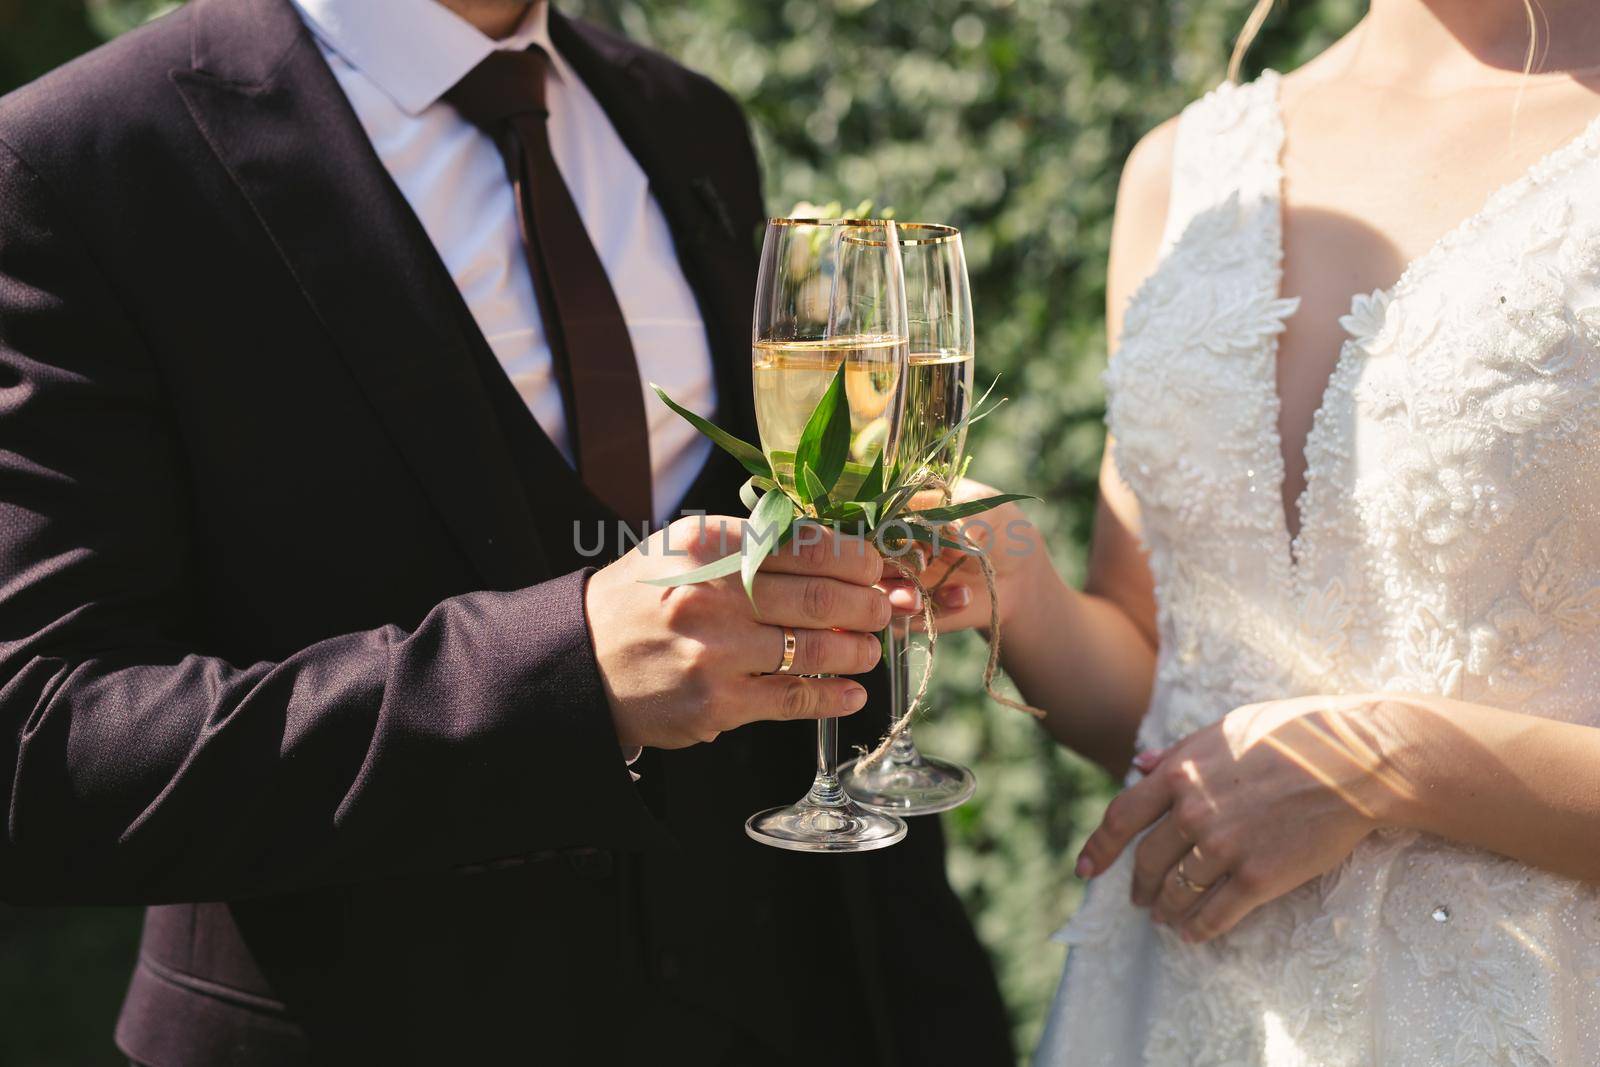 The bride and groom hold crystal glasses filled with champagne